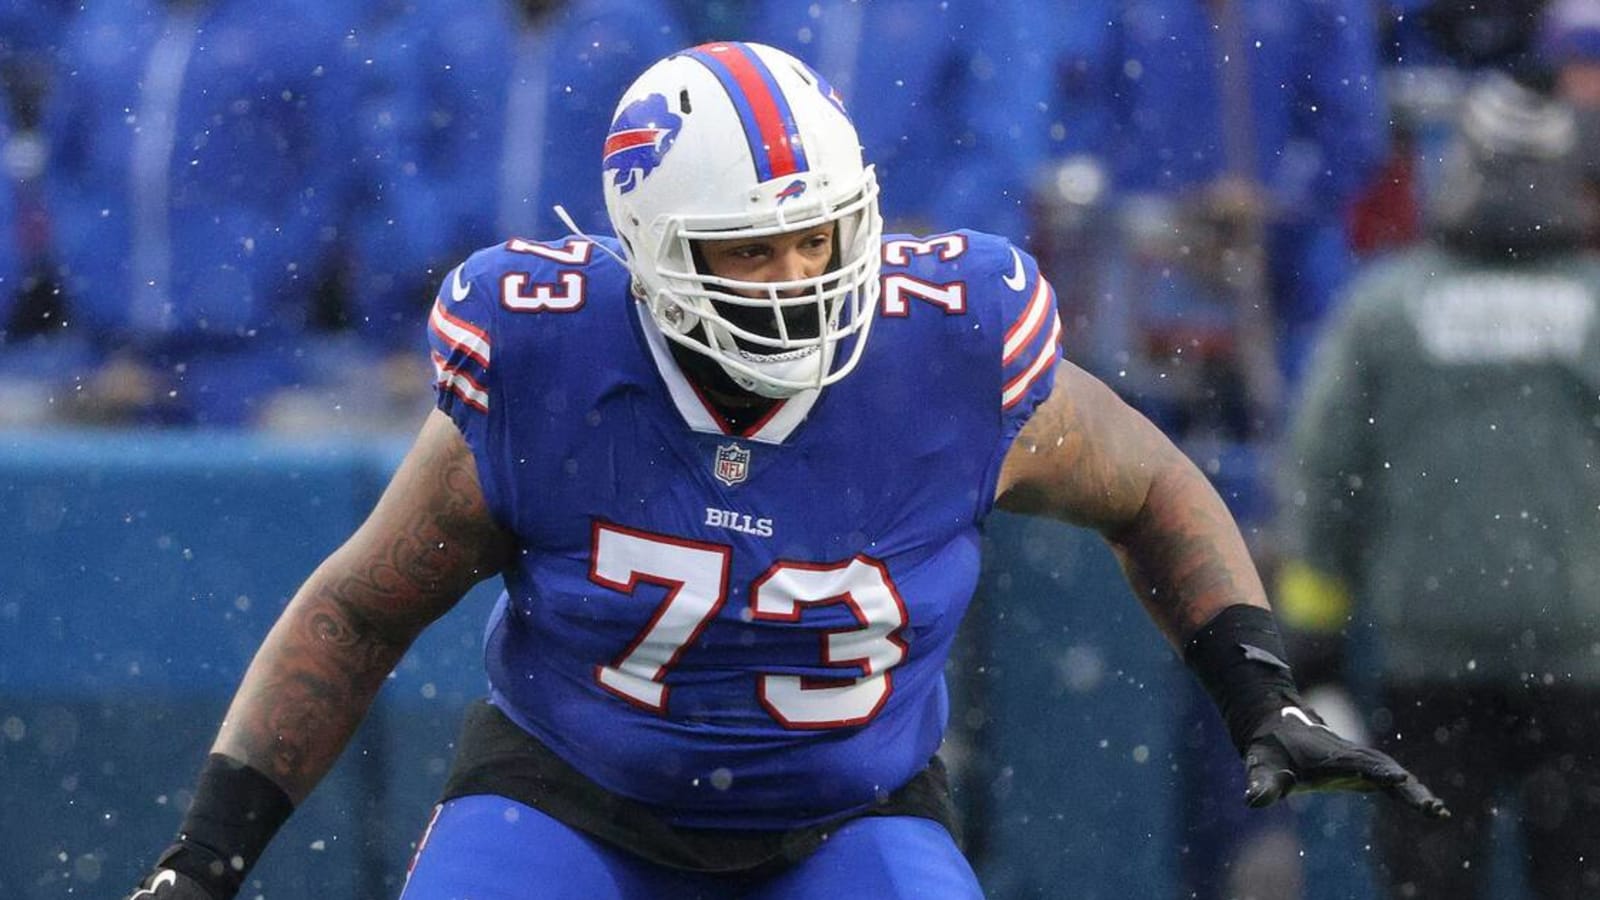 Few changes expected on Bills' offensive line?